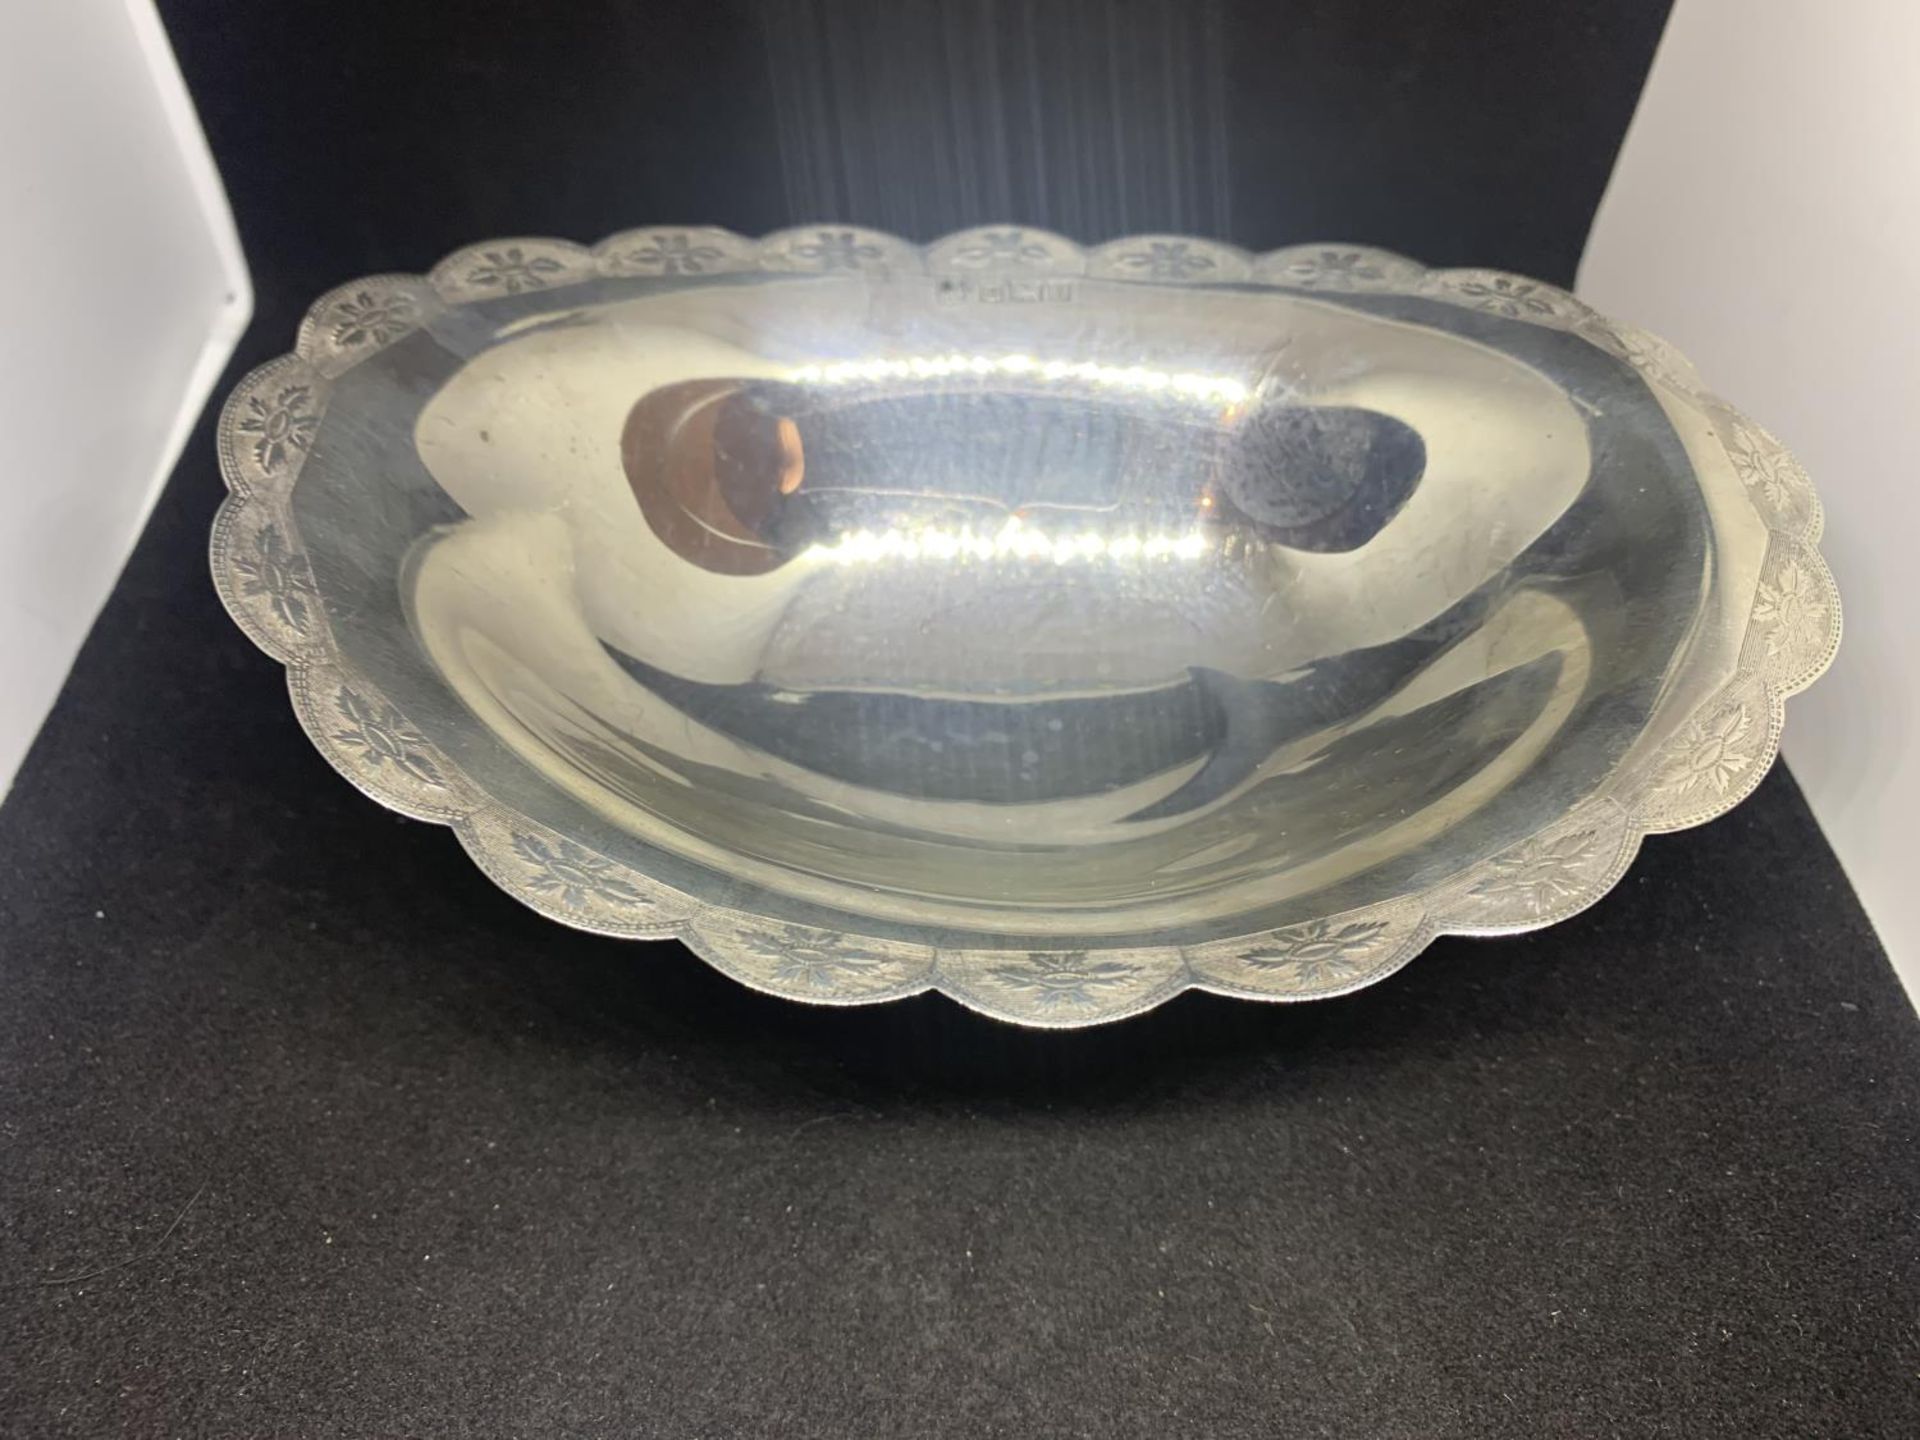 A HALLMARKED BIRMINGHAM 1973 SILVER FOOTED BOWL - 139 GRAMS, HEIGHT 6 CM, WIDTH 16 CM - Image 2 of 4